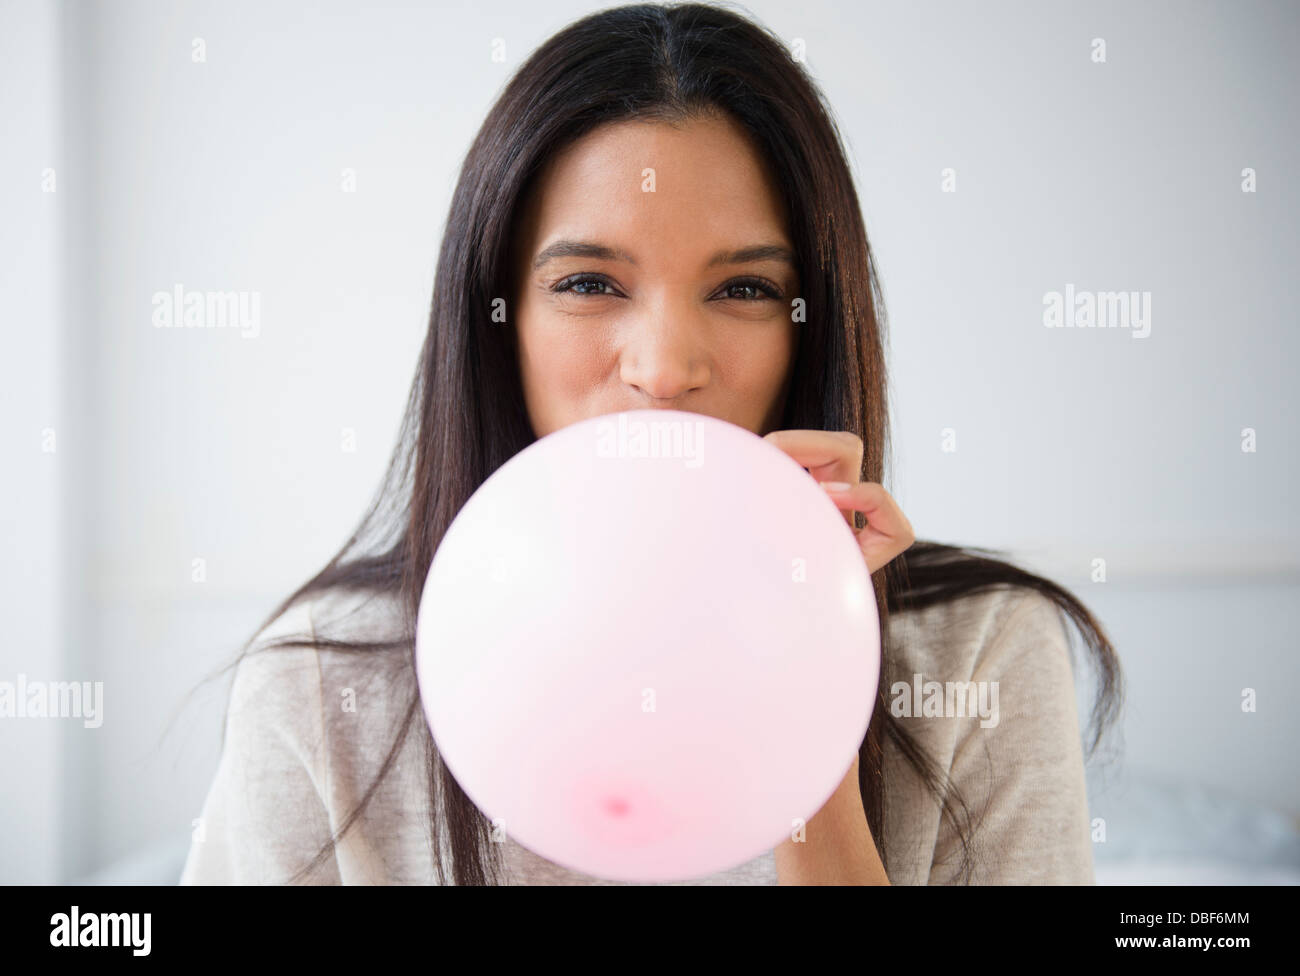 Mixed race woman blowing up balloon Stock Photo